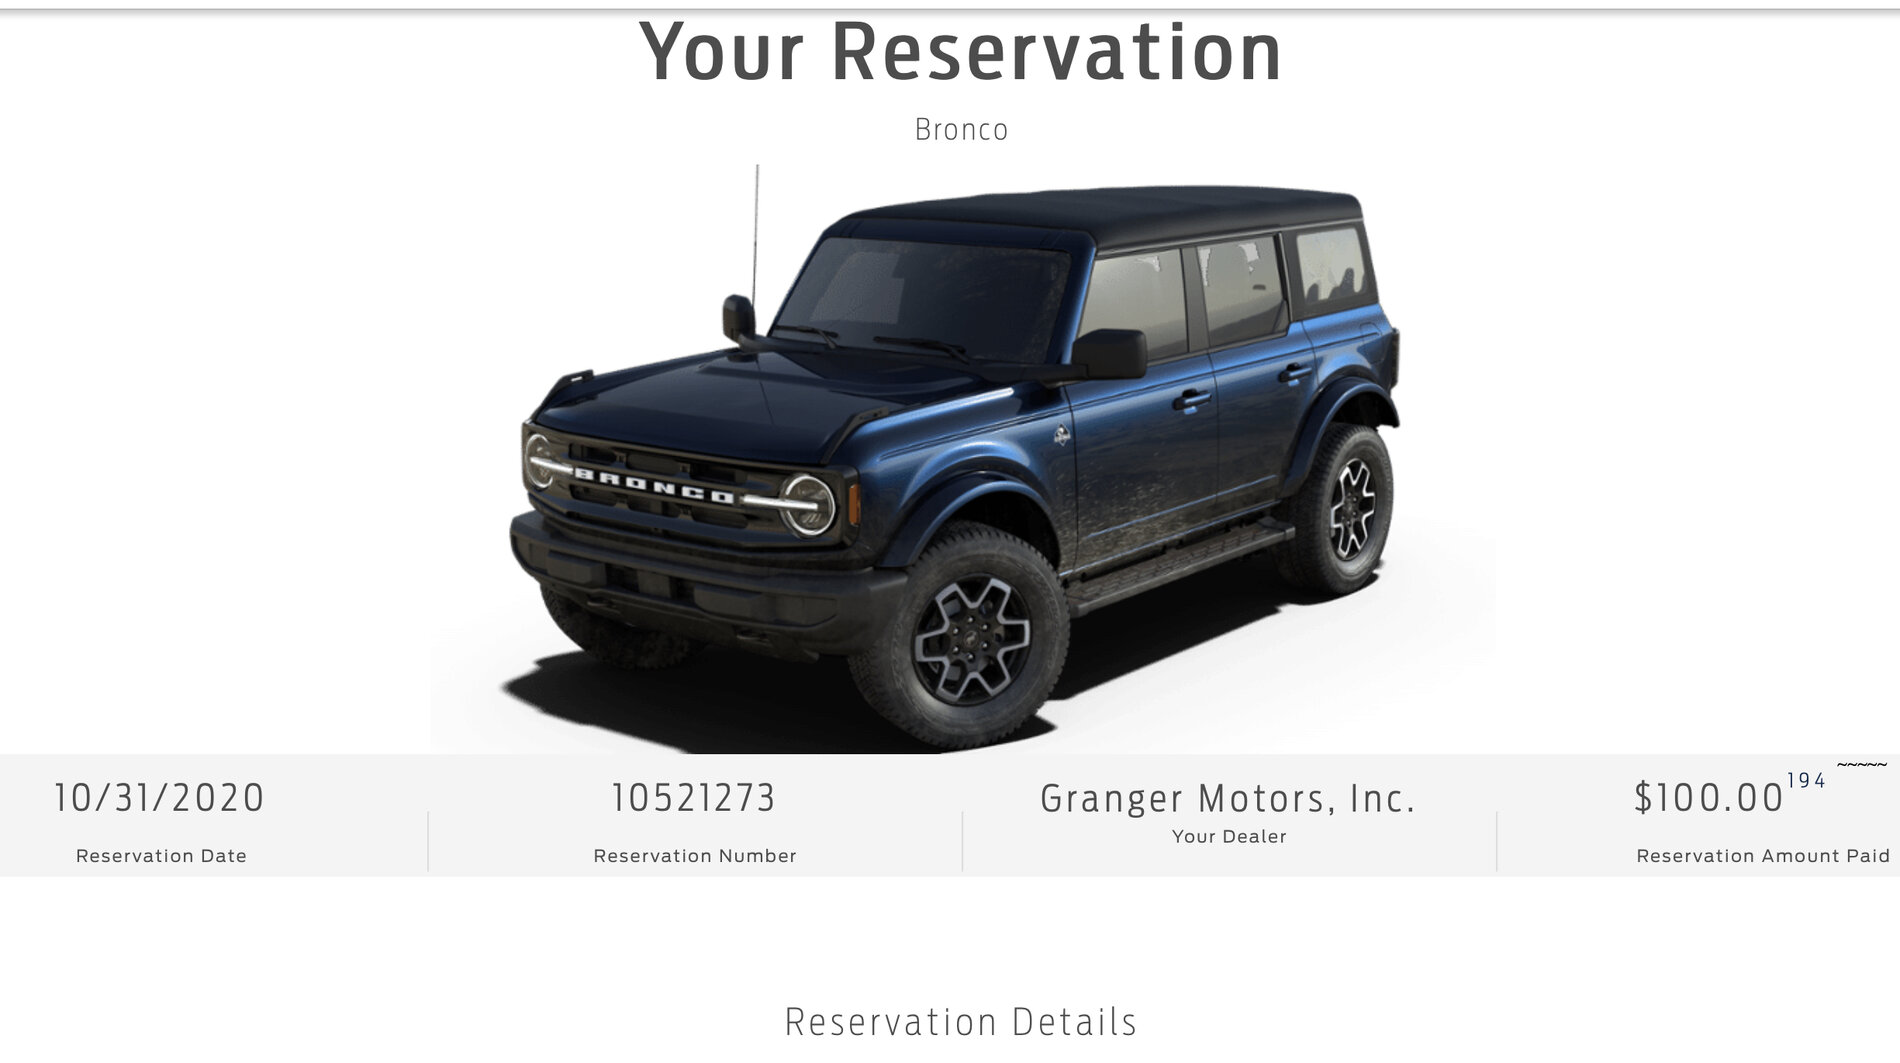 Ford Bronco $2000 off Invoice on October Bronco Reservations at Granger Ford A68F6F38-C0DE-419F-805B-7FDC6A327247